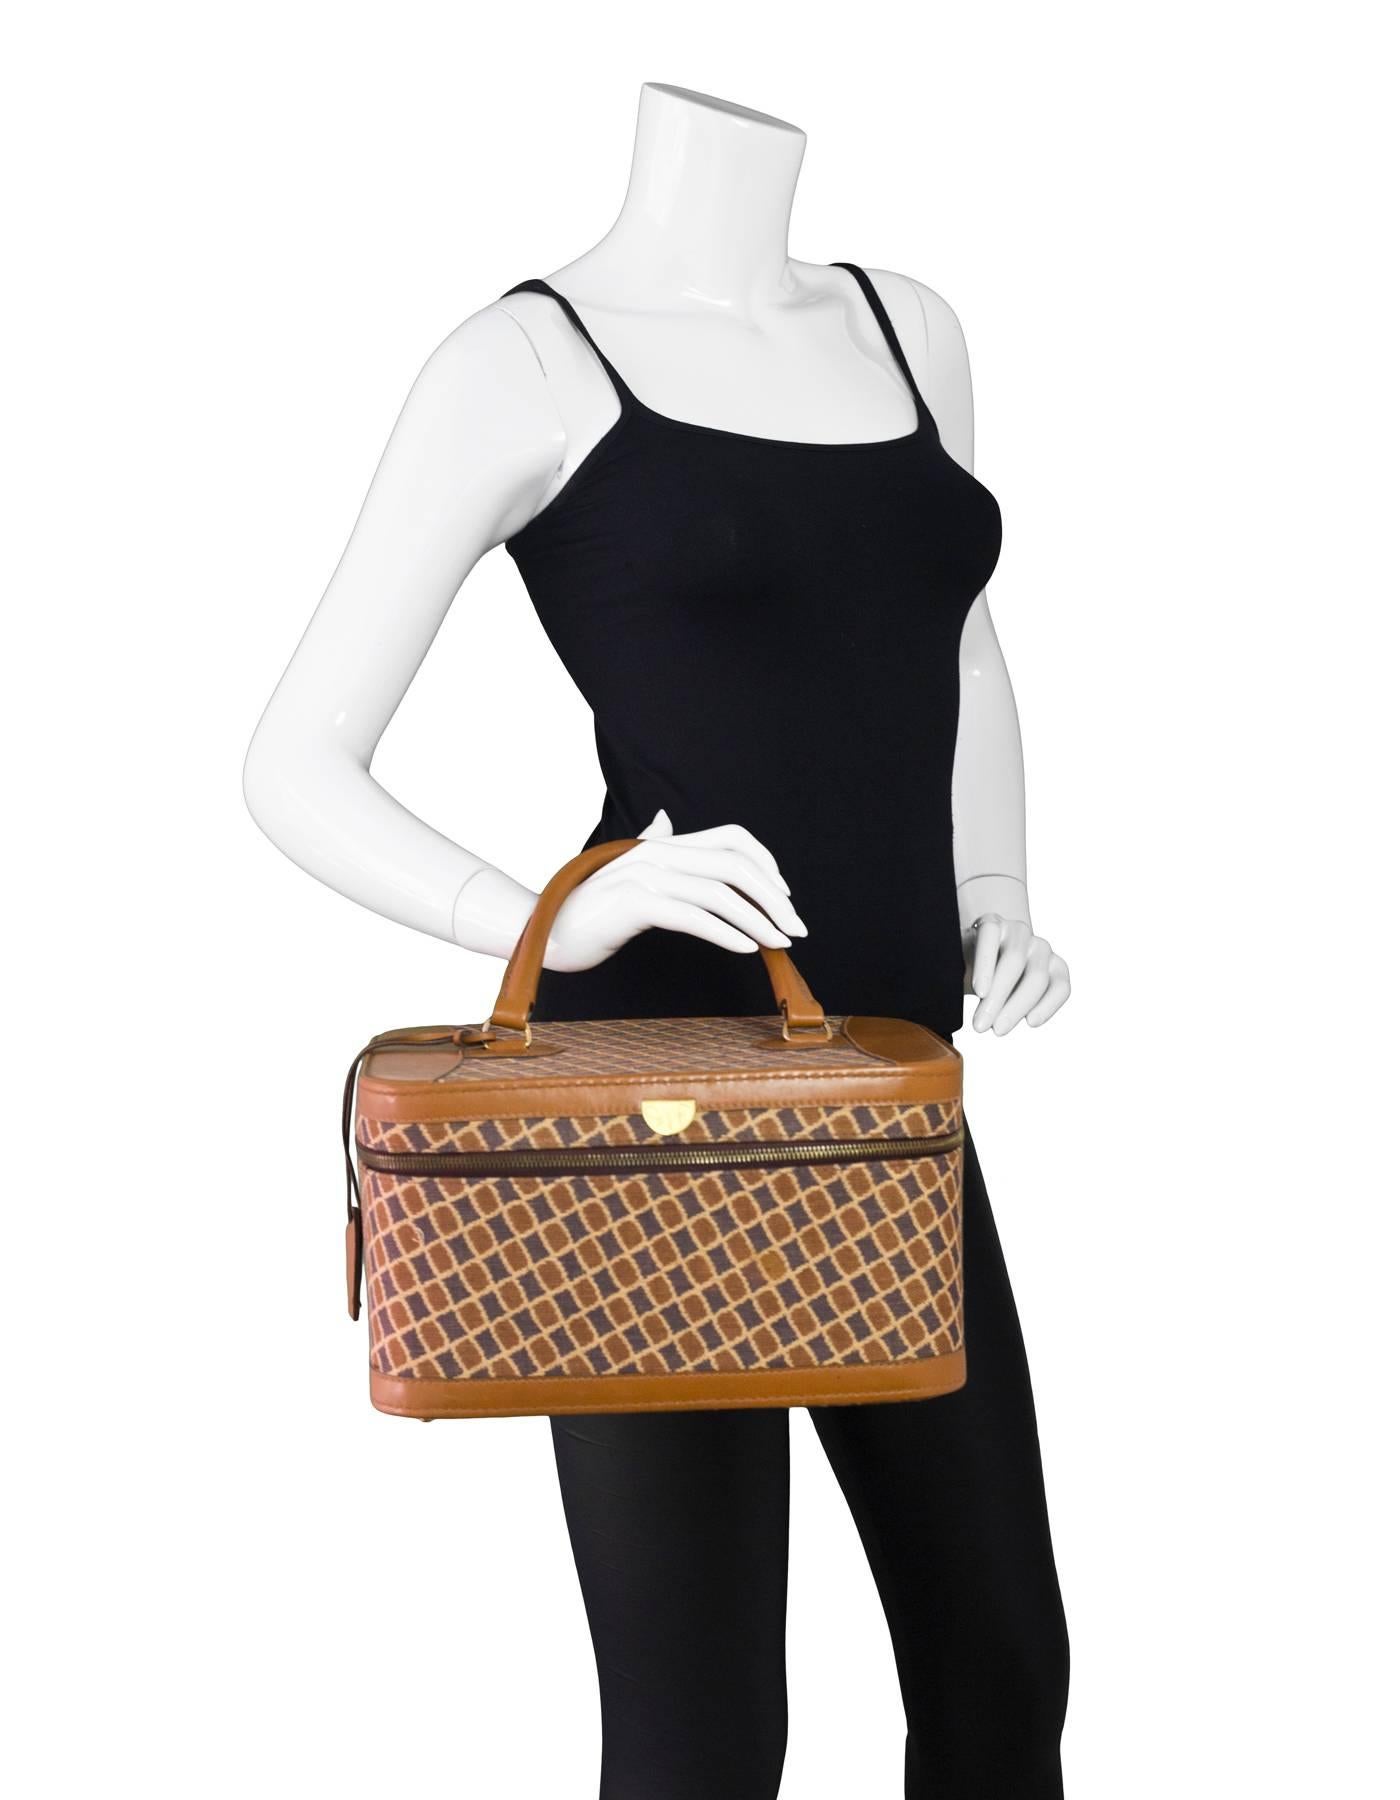 Diane Von Furstenburg Vintage Tan Canvas Train Case

Color: Tan, brown
Hardware: Goldtone
Materials: Canvas, leather
Lining: Brown leather
Closure/Opening: Double zip around top
Exterior Pockets: None
Interior Pockets: four bottle holders
Overall